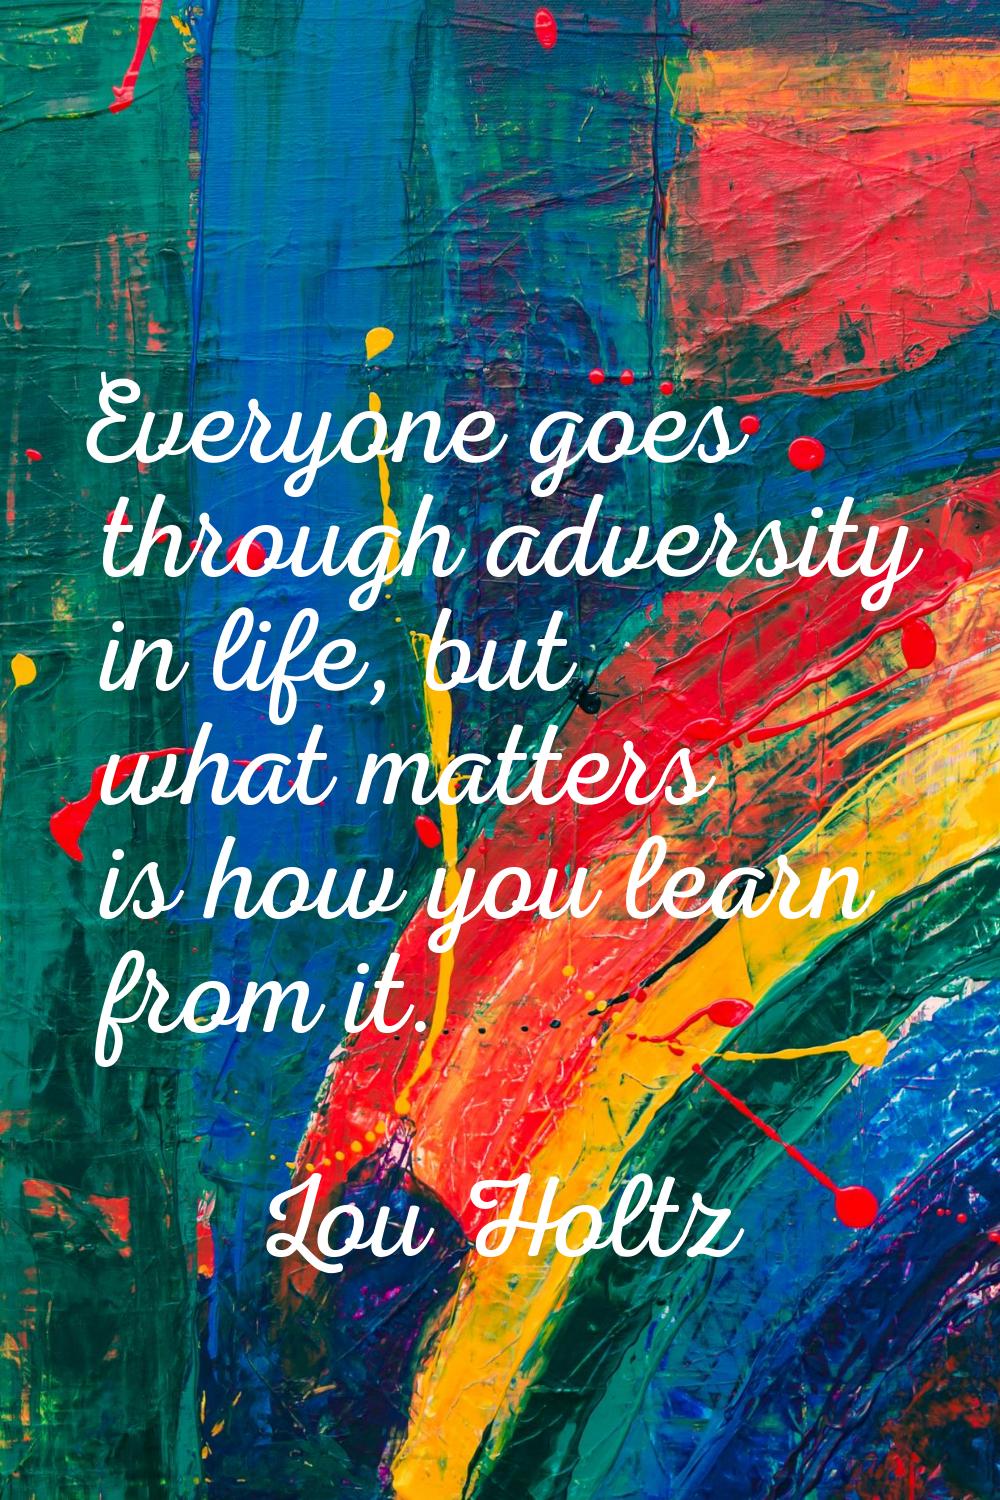 Everyone goes through adversity in life, but what matters is how you learn from it.